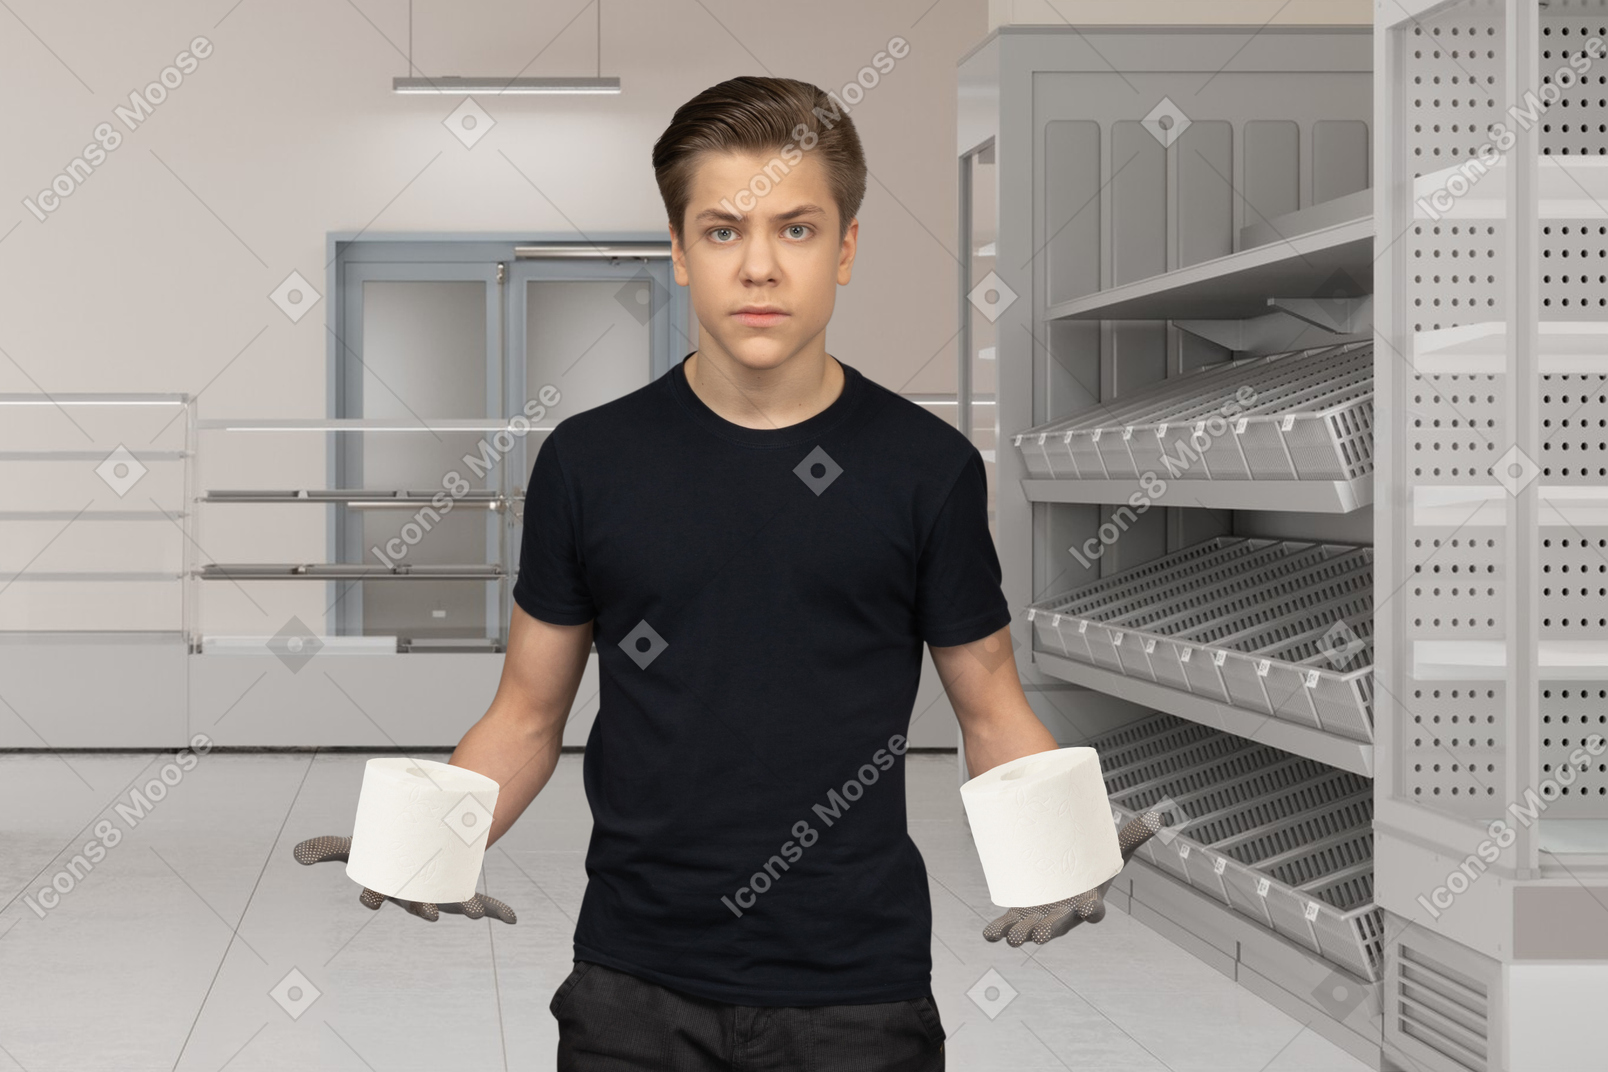 A young man holding toilet paper